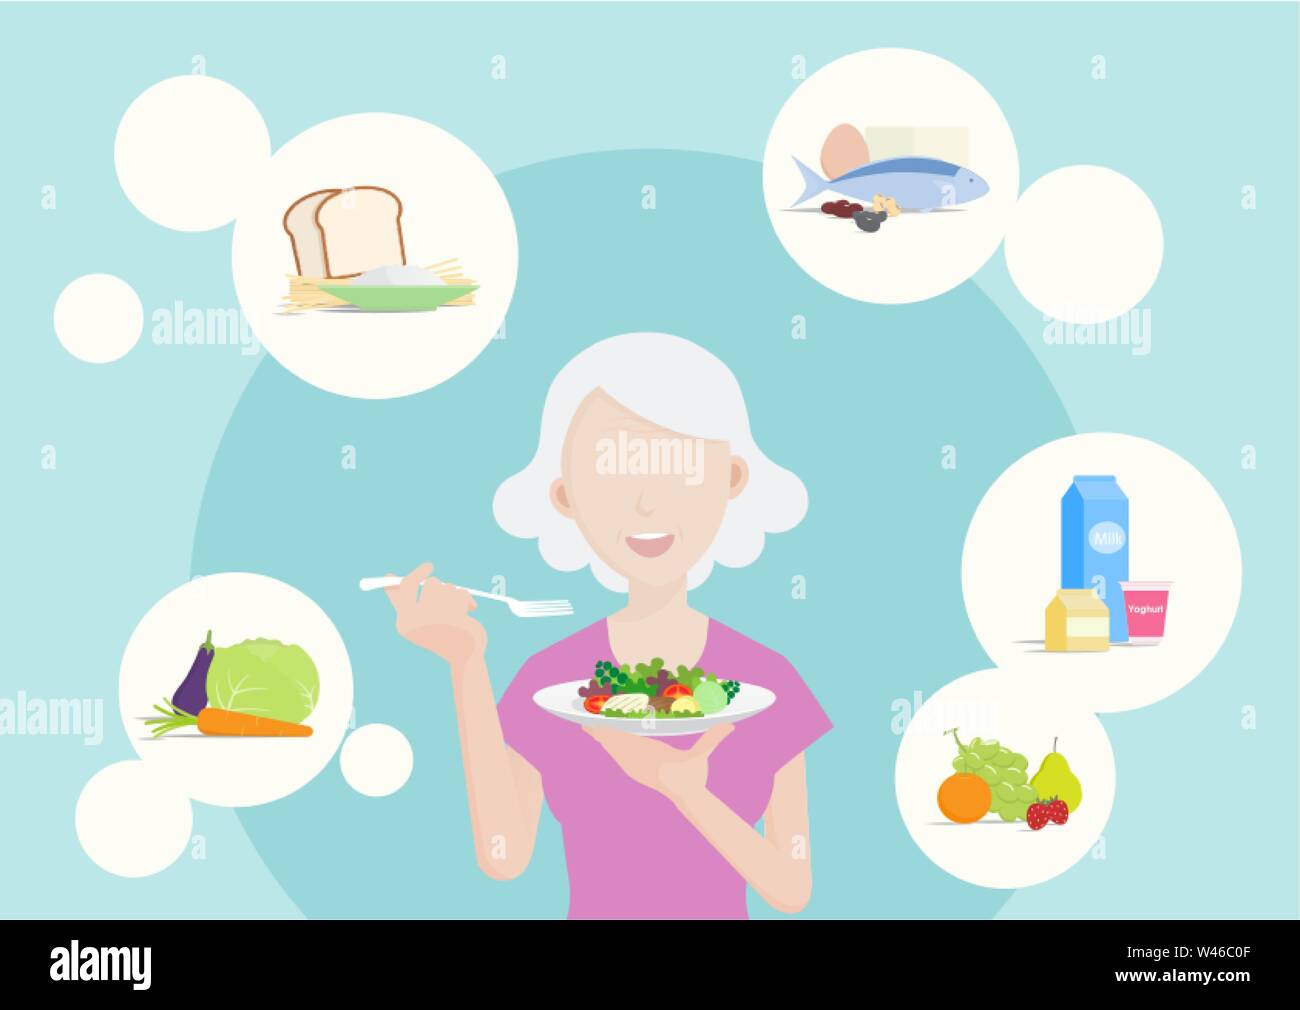 Old woman eating healthy food, 5 food groups, organic. Vecter illustration cartoon character style concept of healthy lifestyle and proper nutrition. Stock Vector